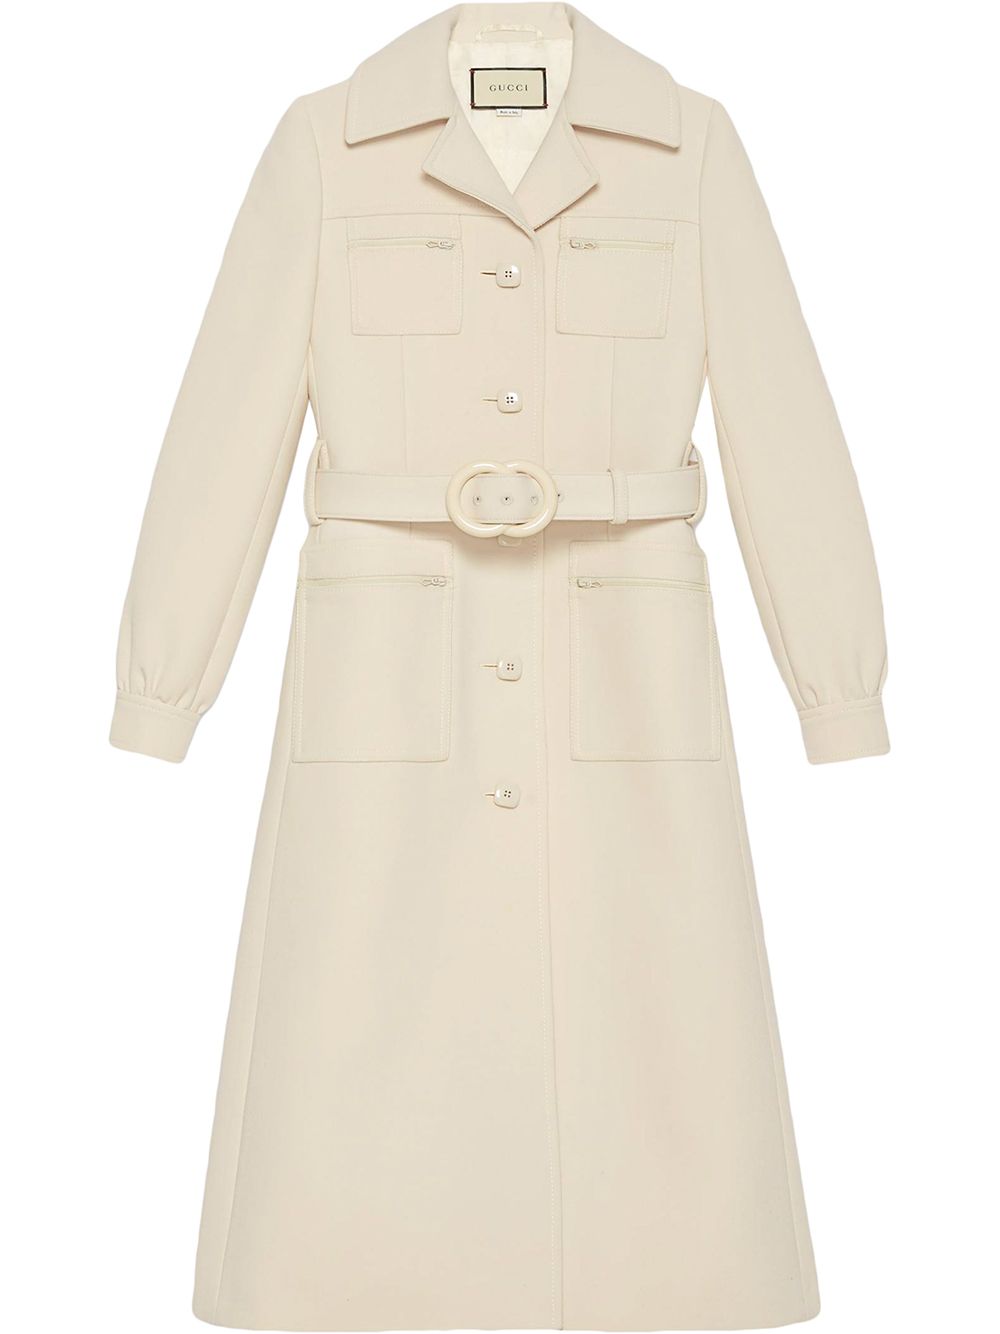 Shop Gucci Interlocking G belted coat with Express Delivery - FARFETCH